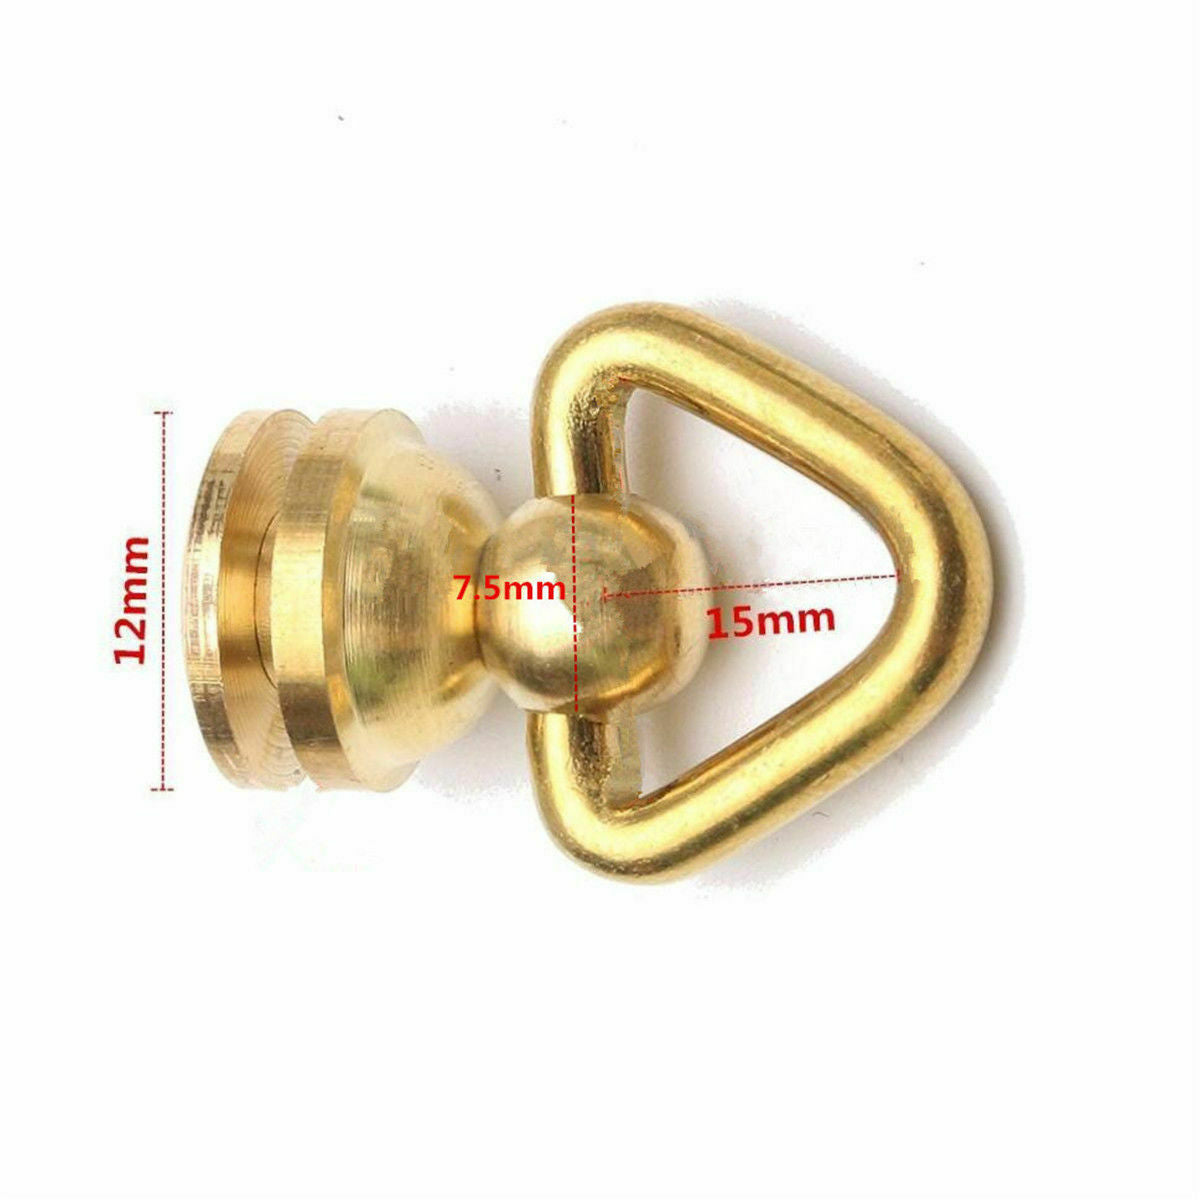 Metal Brass Copper Connector Joint Buckle For Wallet Chain Key Safety Hardware